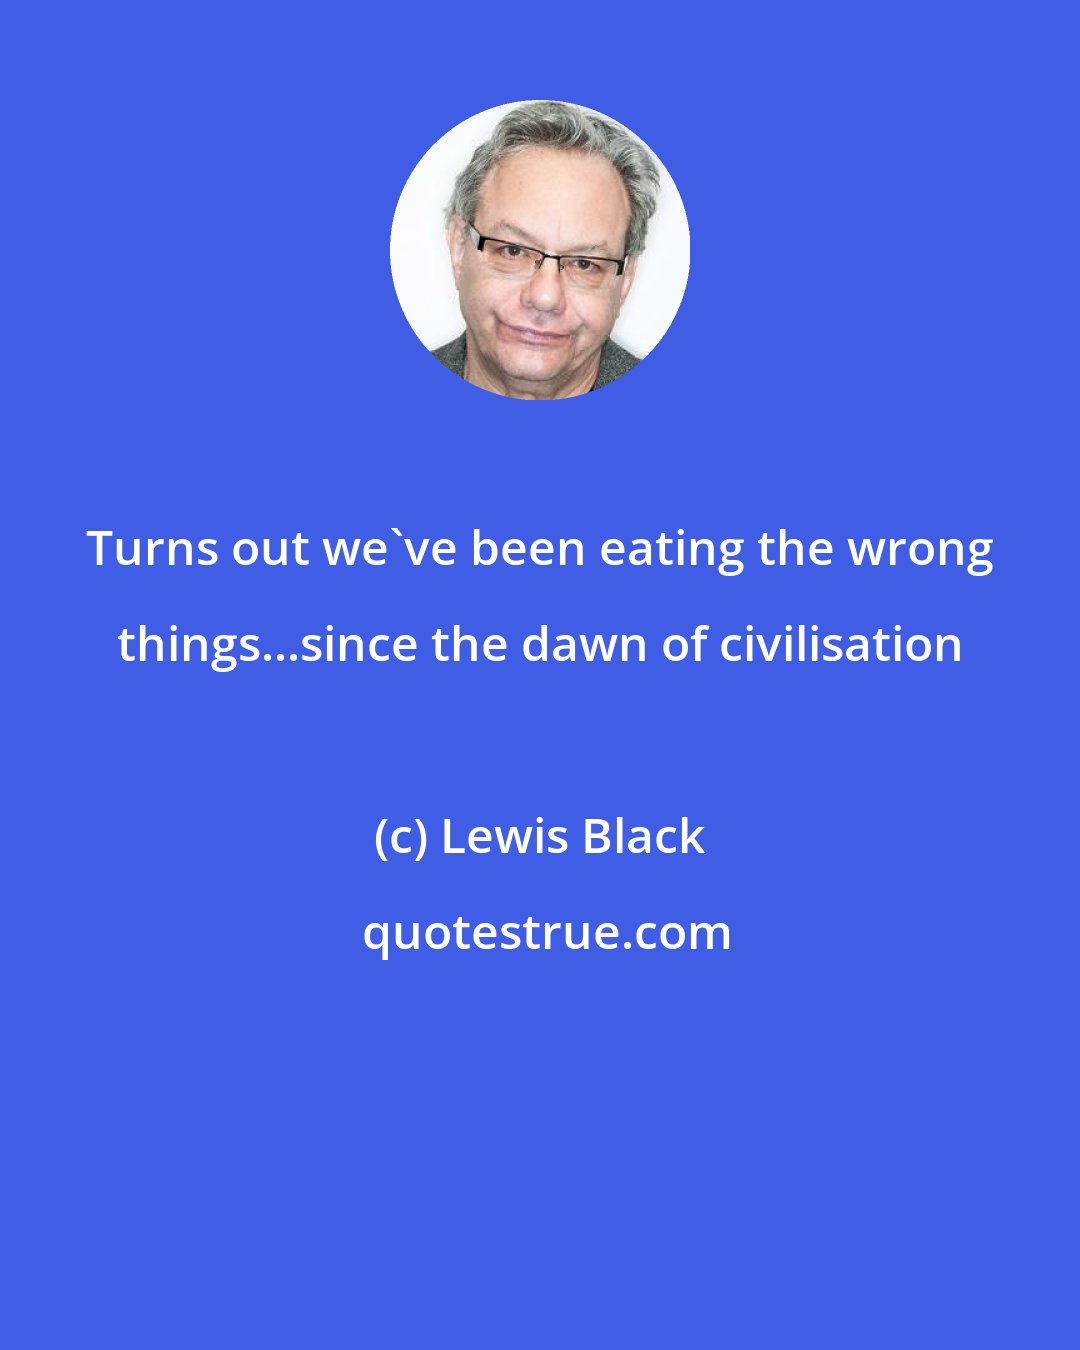 Lewis Black: Turns out we've been eating the wrong things...since the dawn of civilisation